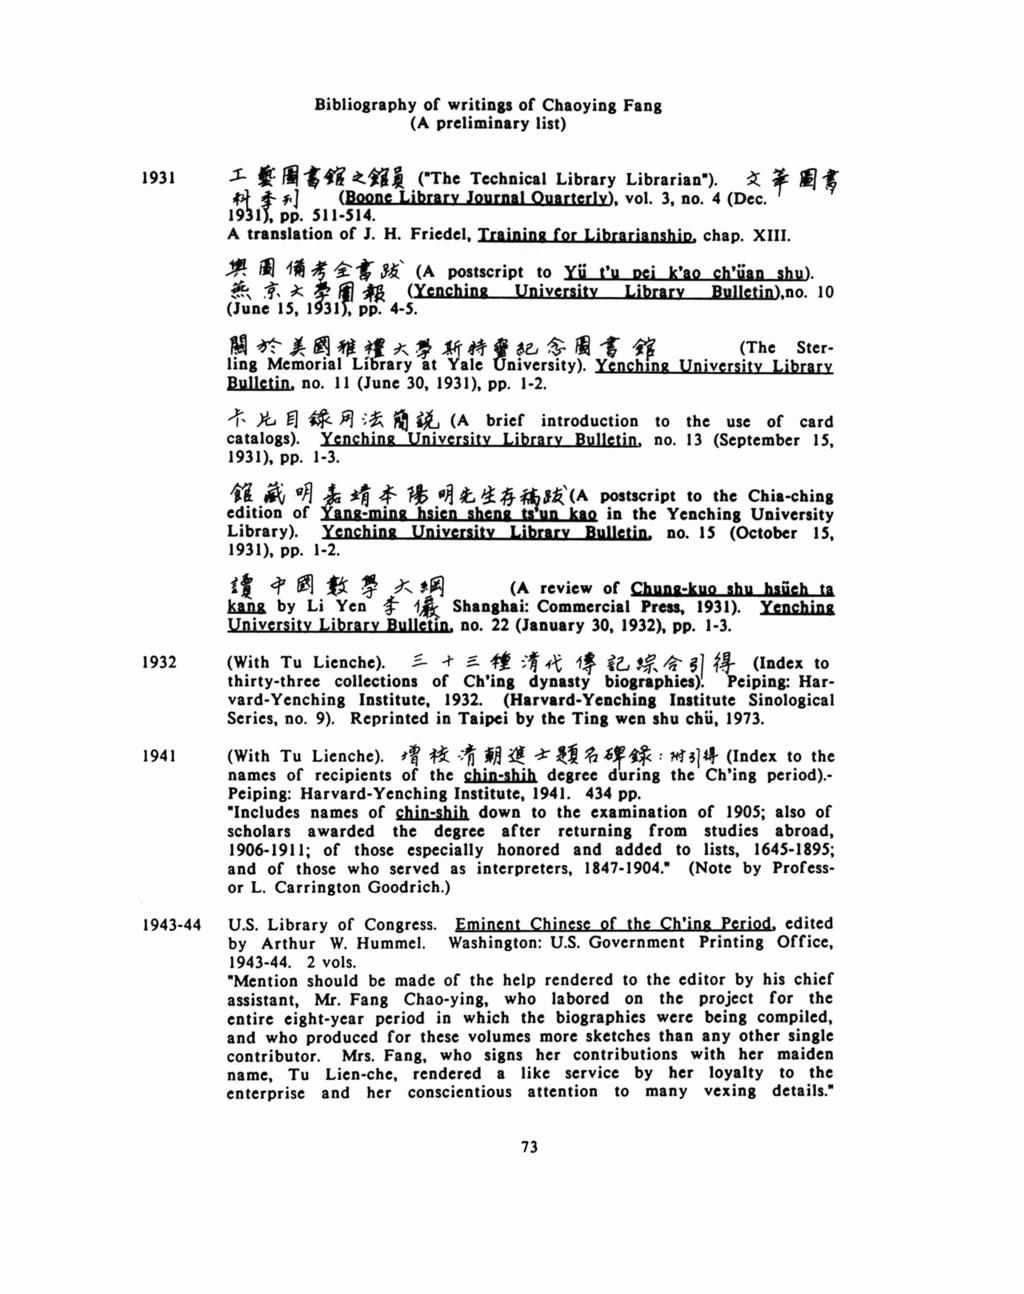 Bibliography of writings of Chaoying Fang (A preliminary list) 1931 ;1:- l ~ t fi ::tti.i ("The Technical Library Librarian"). ~ f lj t 4J} *1'] (Boone Library Journal QuarterlY), vol. 3, no. 4 (Dec.